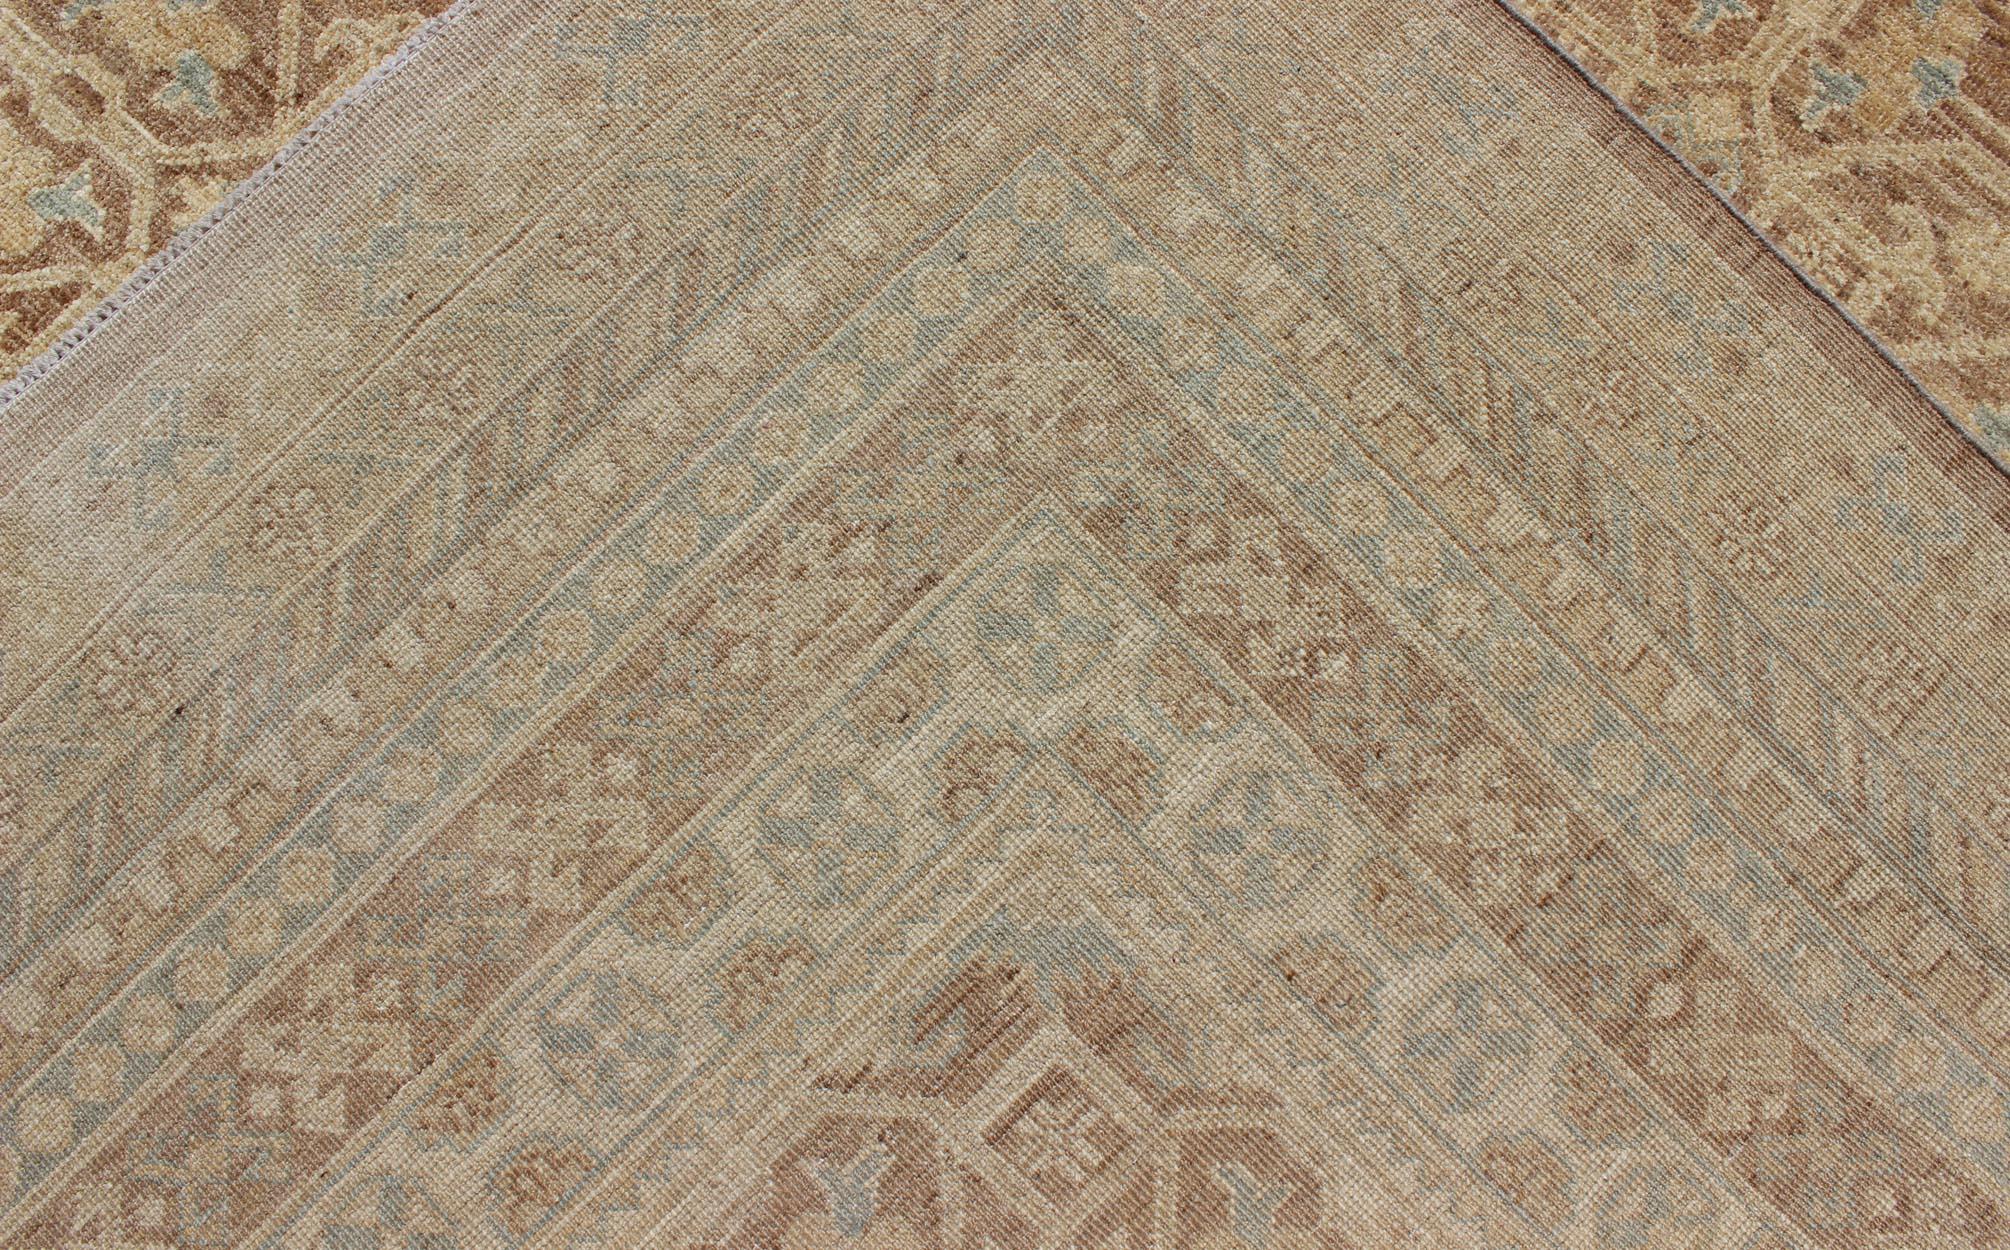 Khotan Design Rug with All-Over Geometric Pattern in Light Brown, Butter & Blue For Sale 2